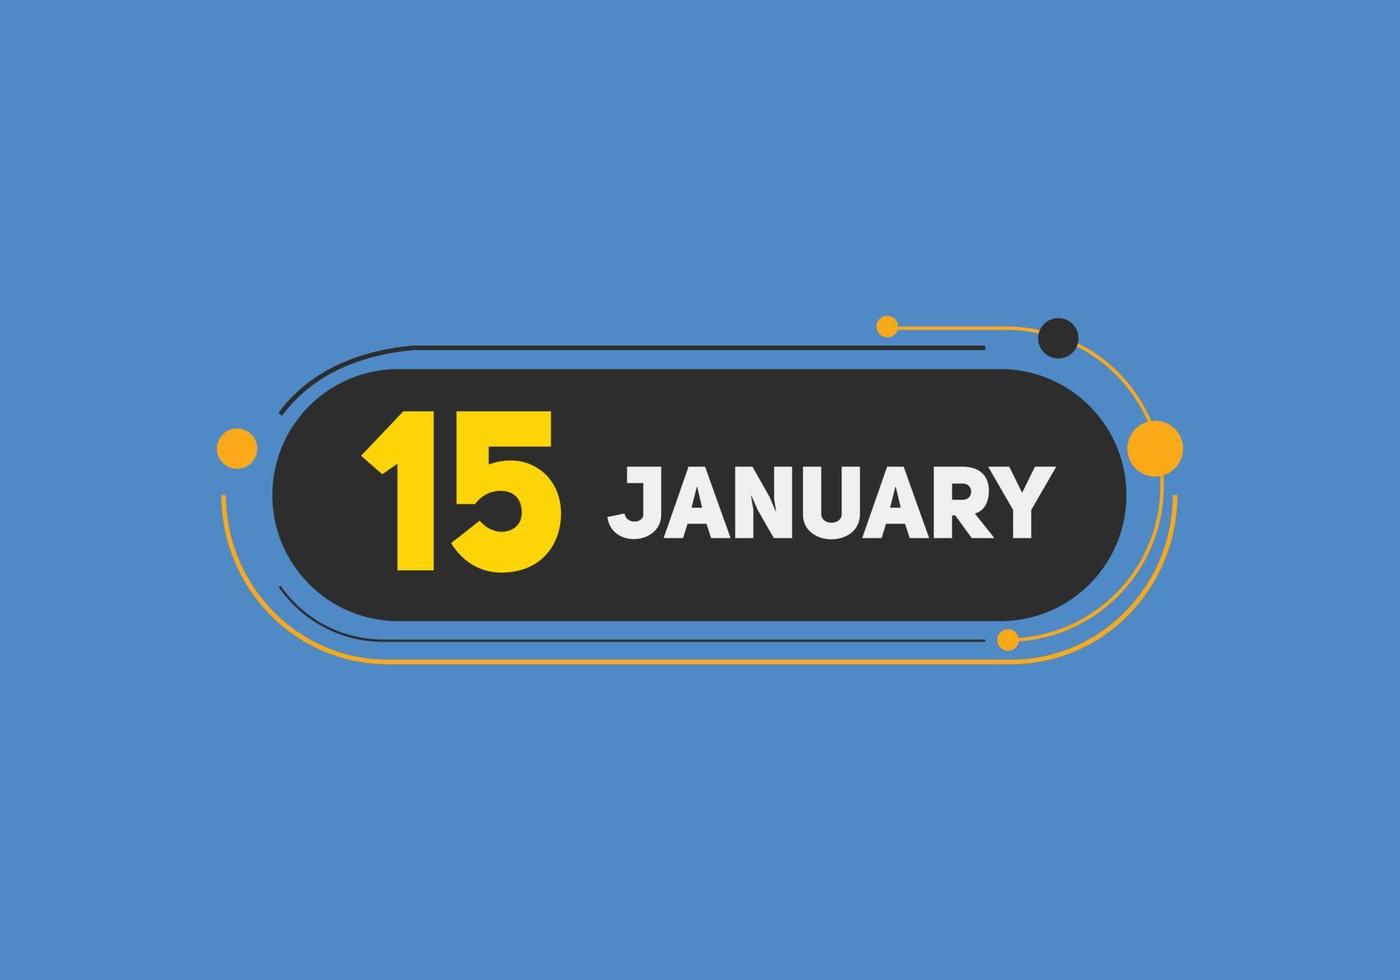 january 15 calendar reminder. 15th january daily calendar icon template. Calendar 15th january icon Design template. Vector illustration